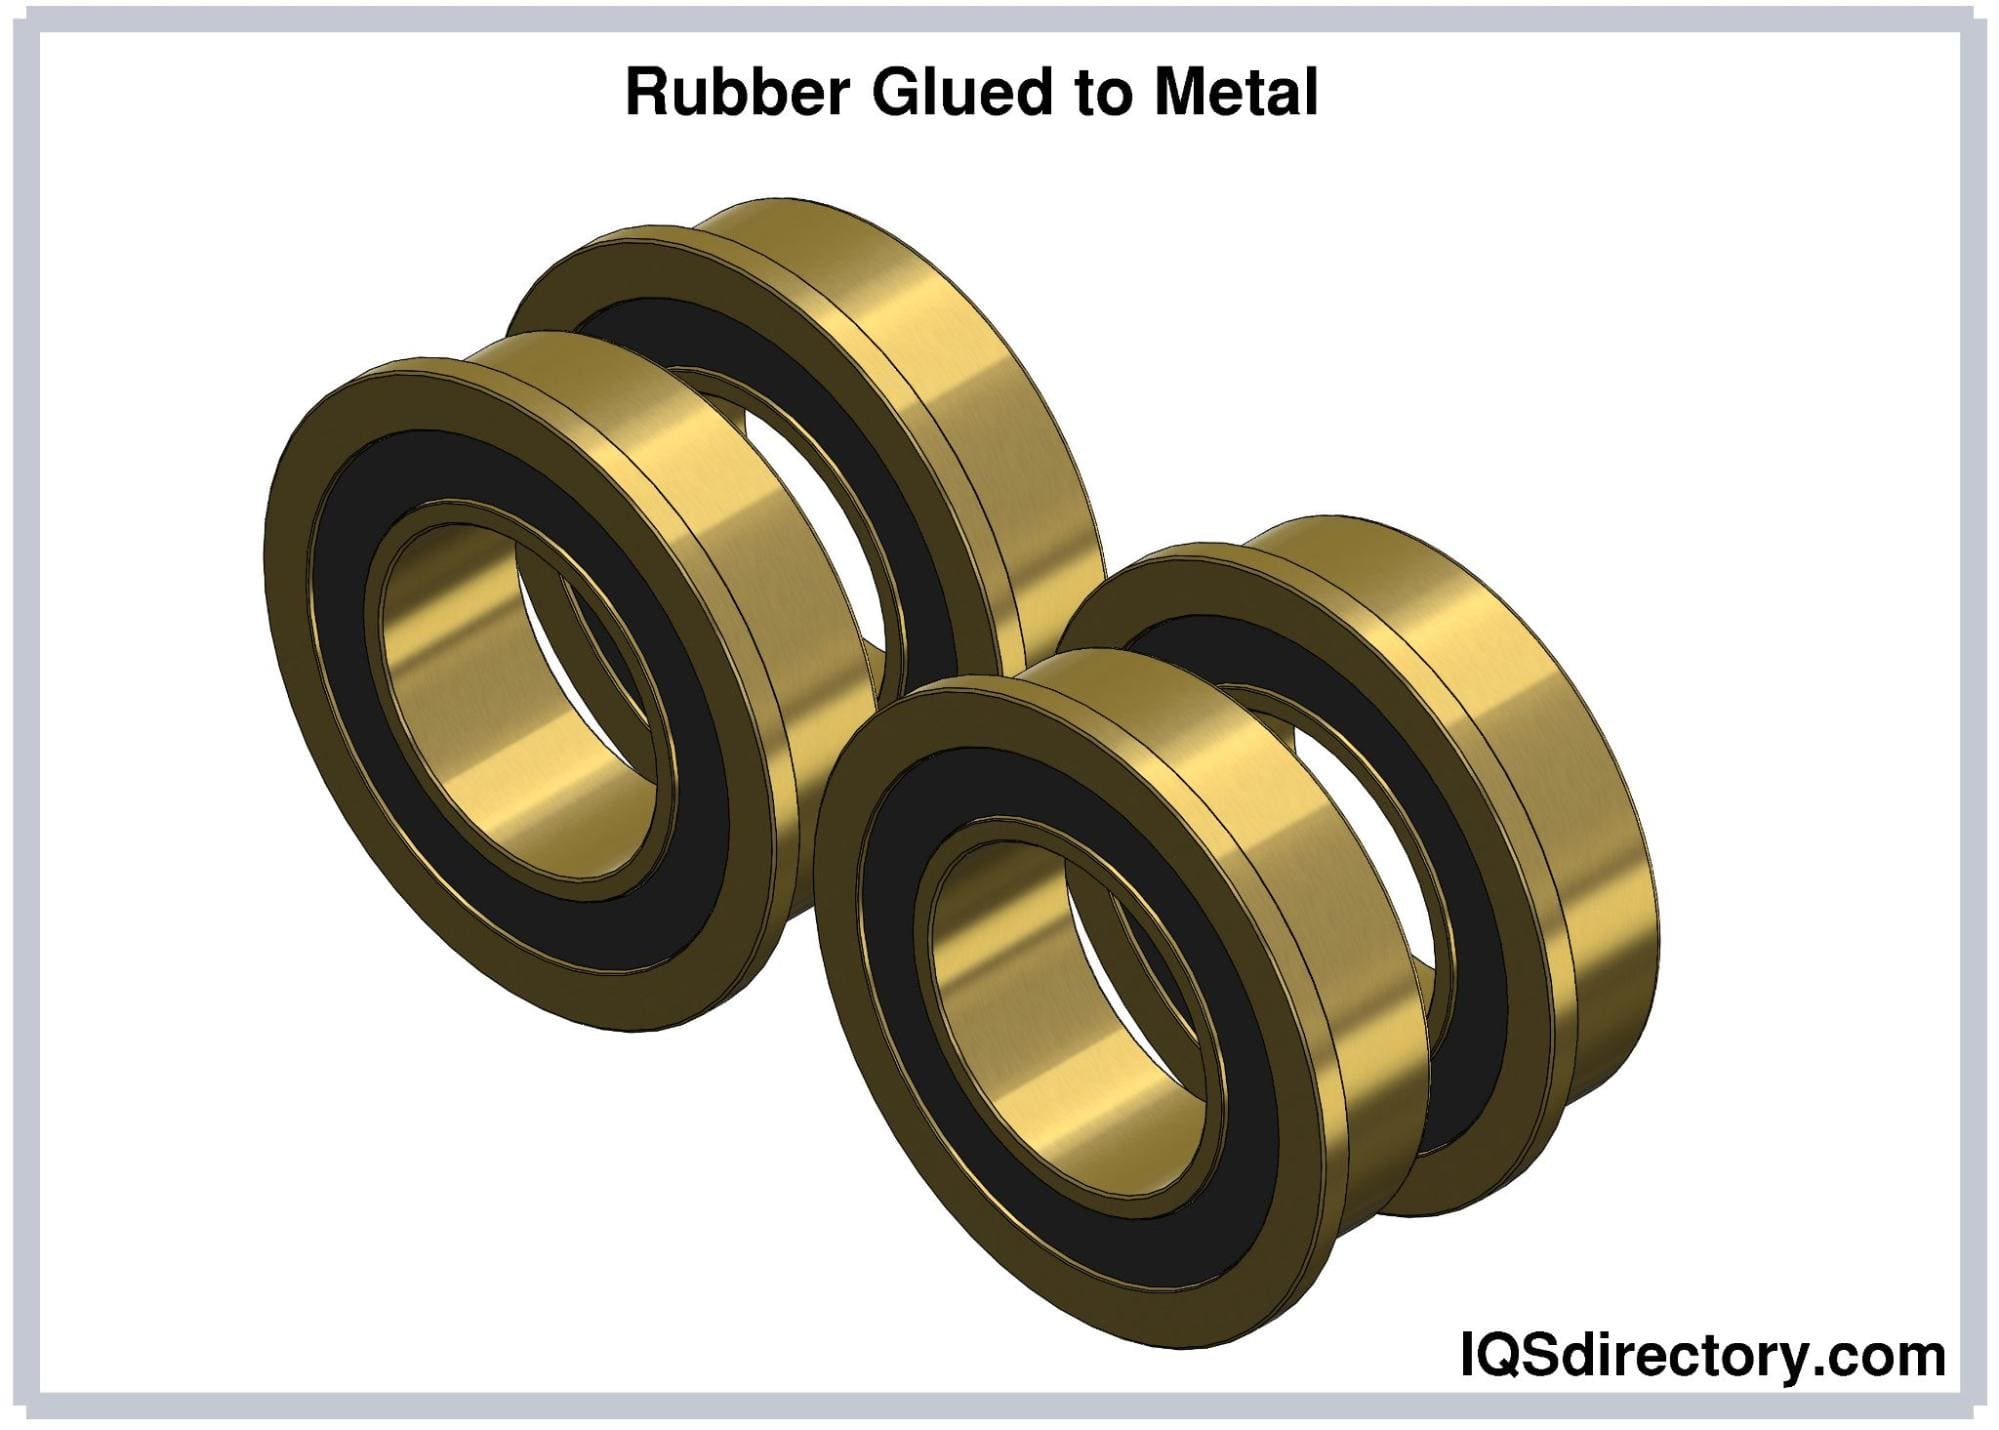 Rubber to Metal Bonding: Products, Applications, Benefits, and Process,  Metal To Metal Glue